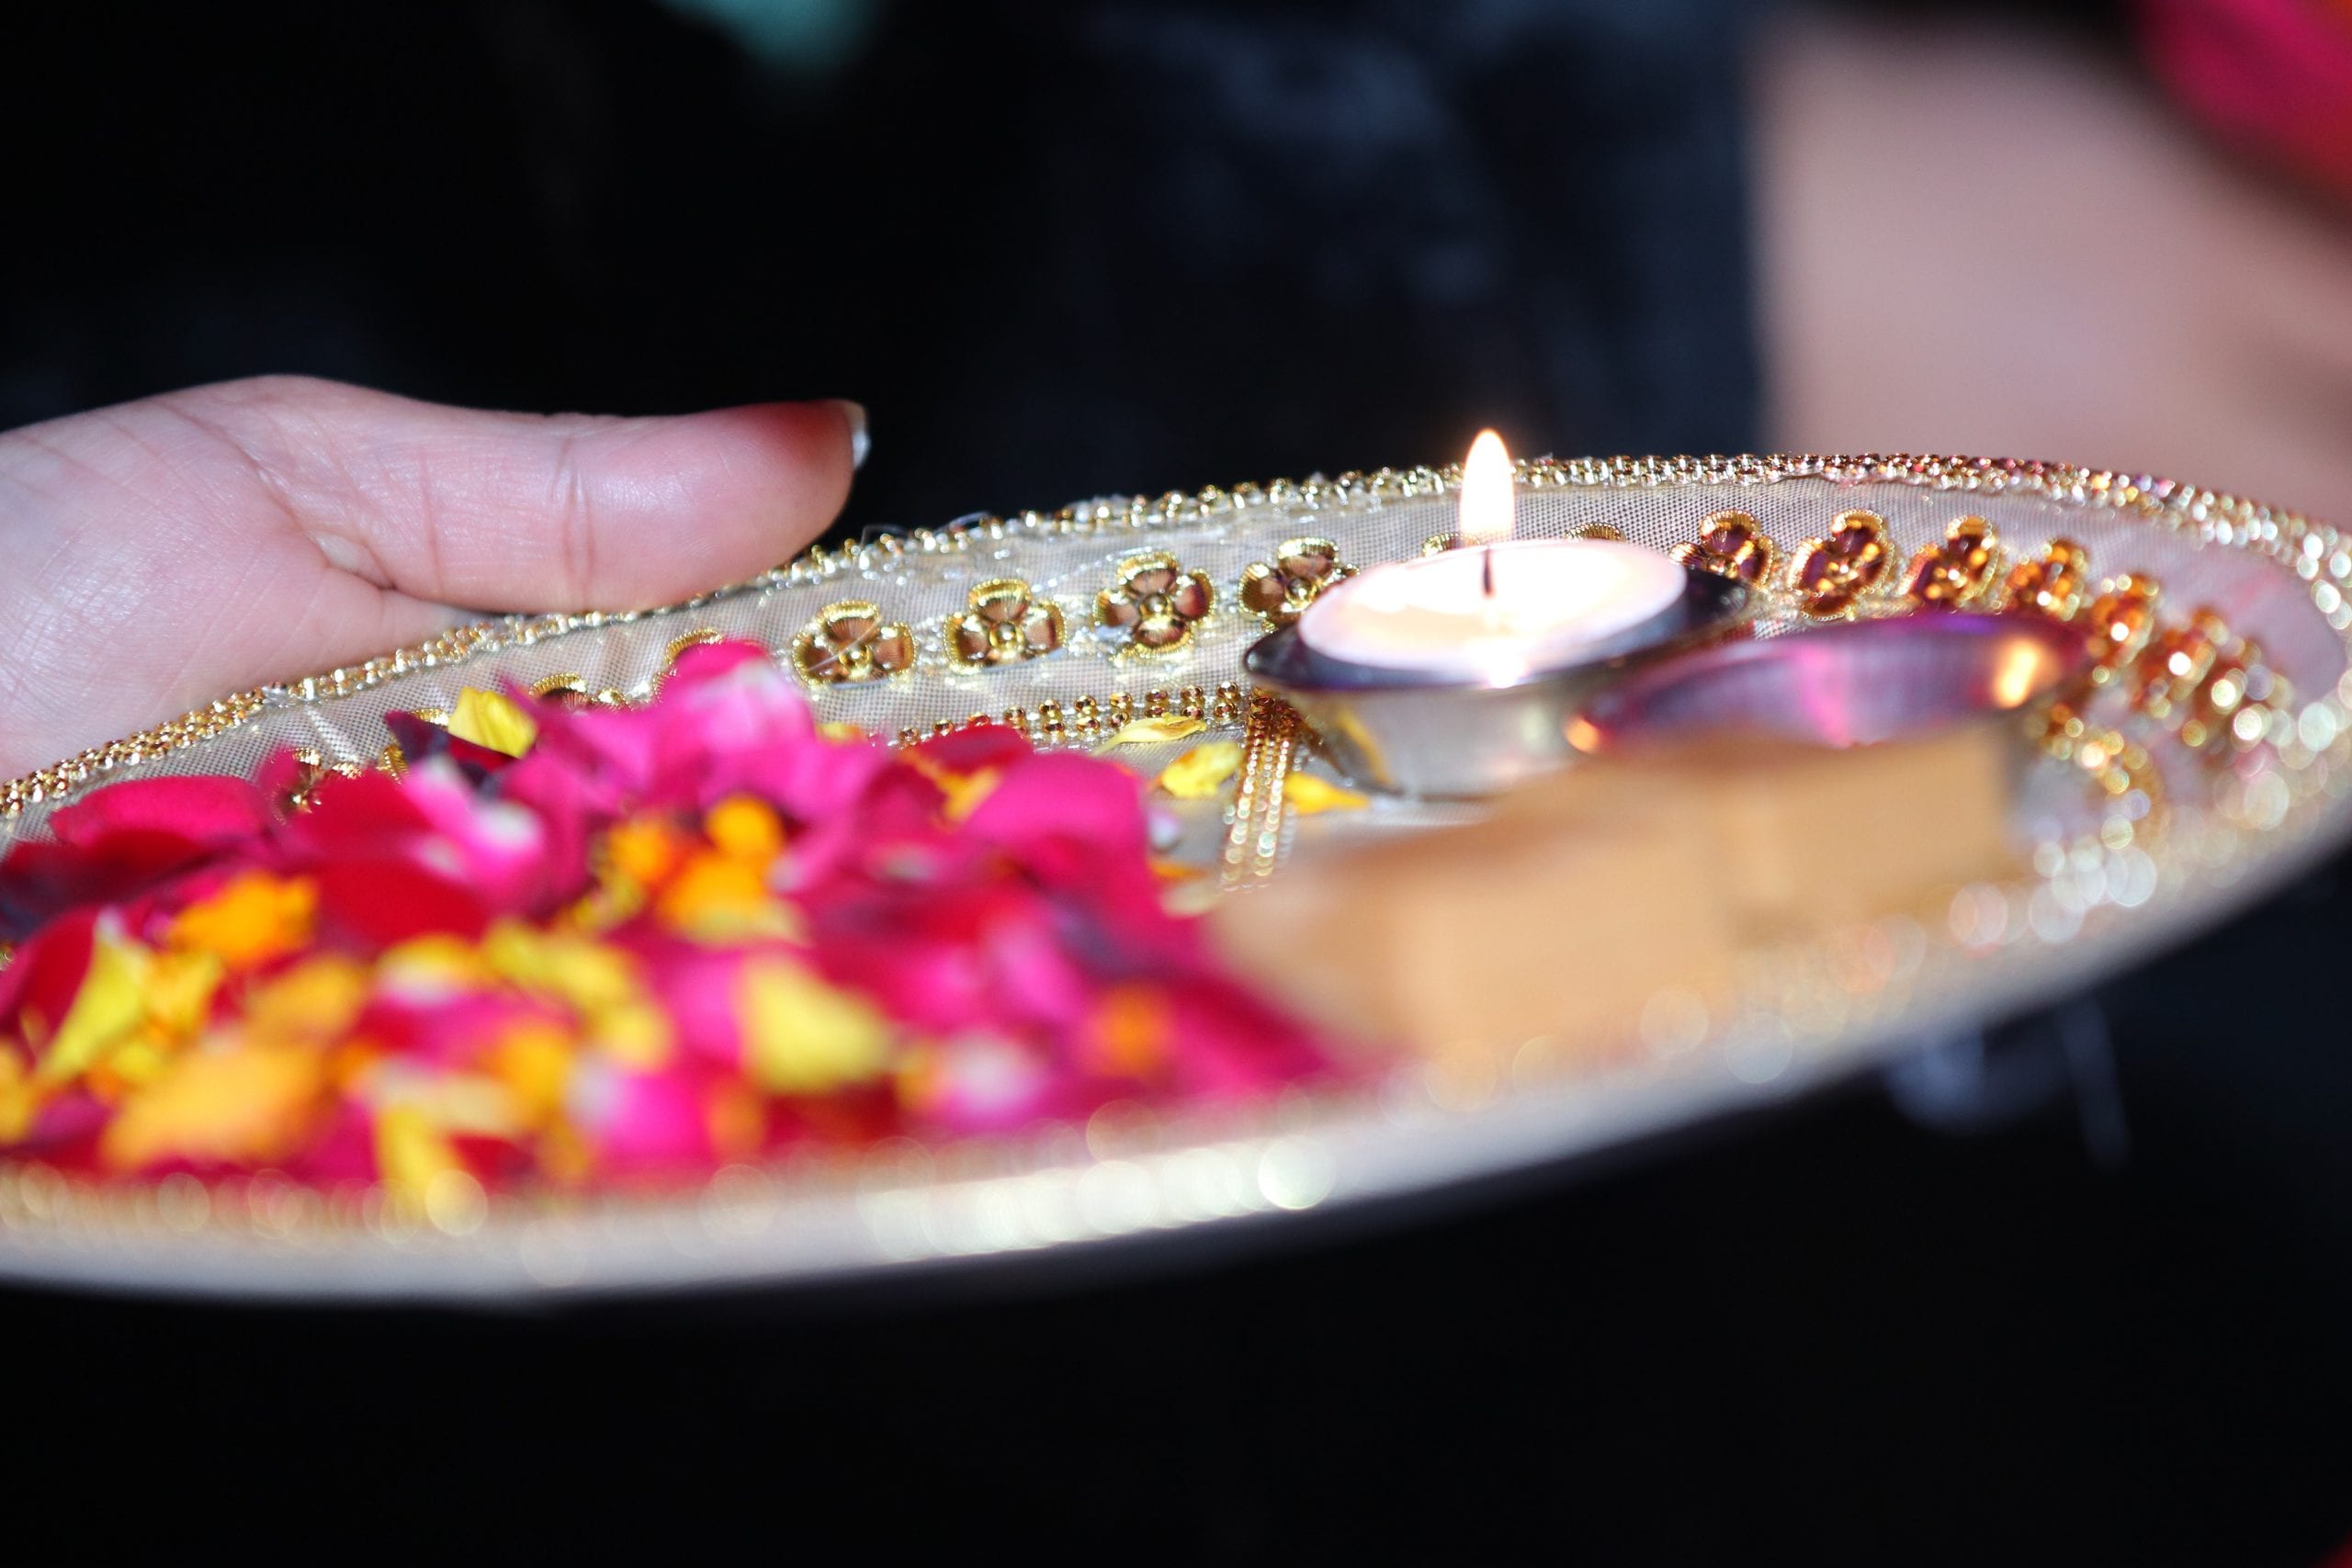 Which is the first day of Diwali, dedicated to cleaning homes and purchasing small items of gold?